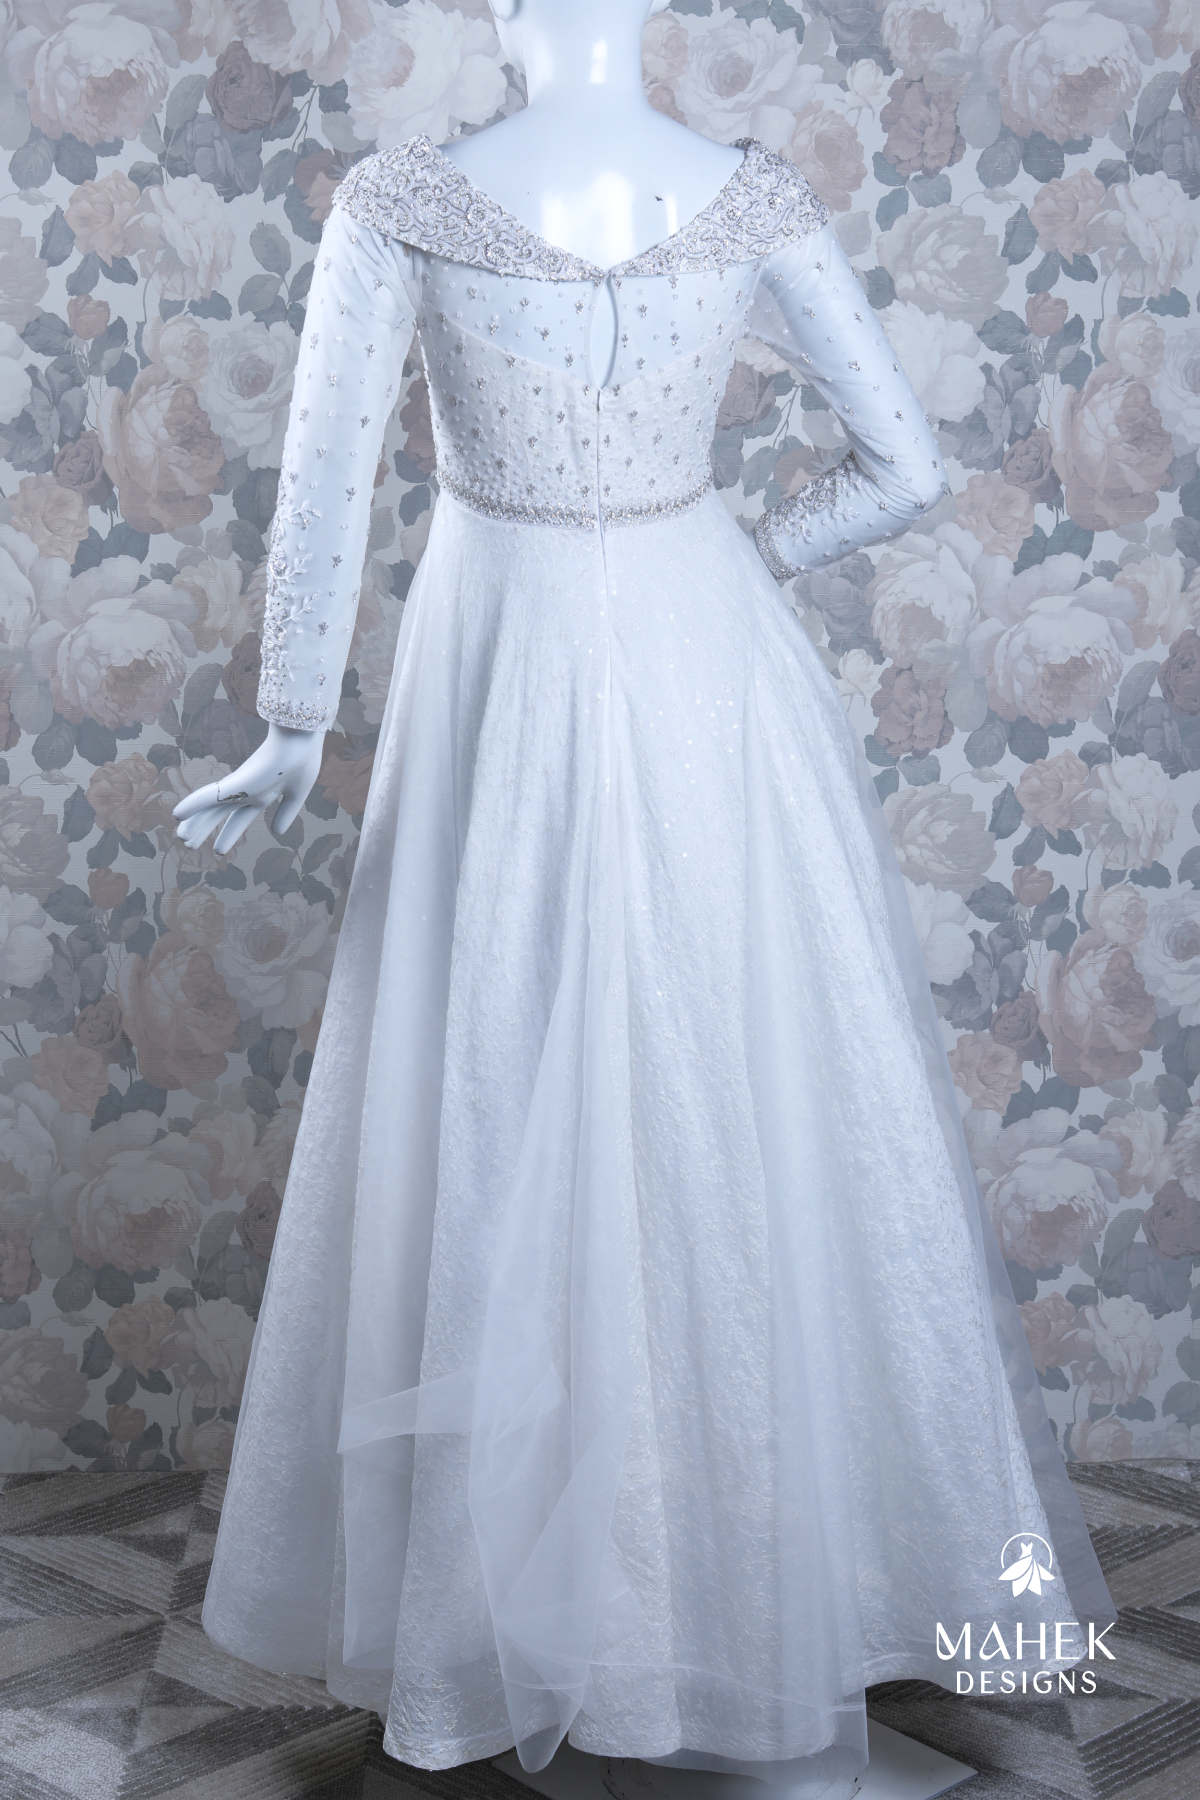 White gown with full sleeve